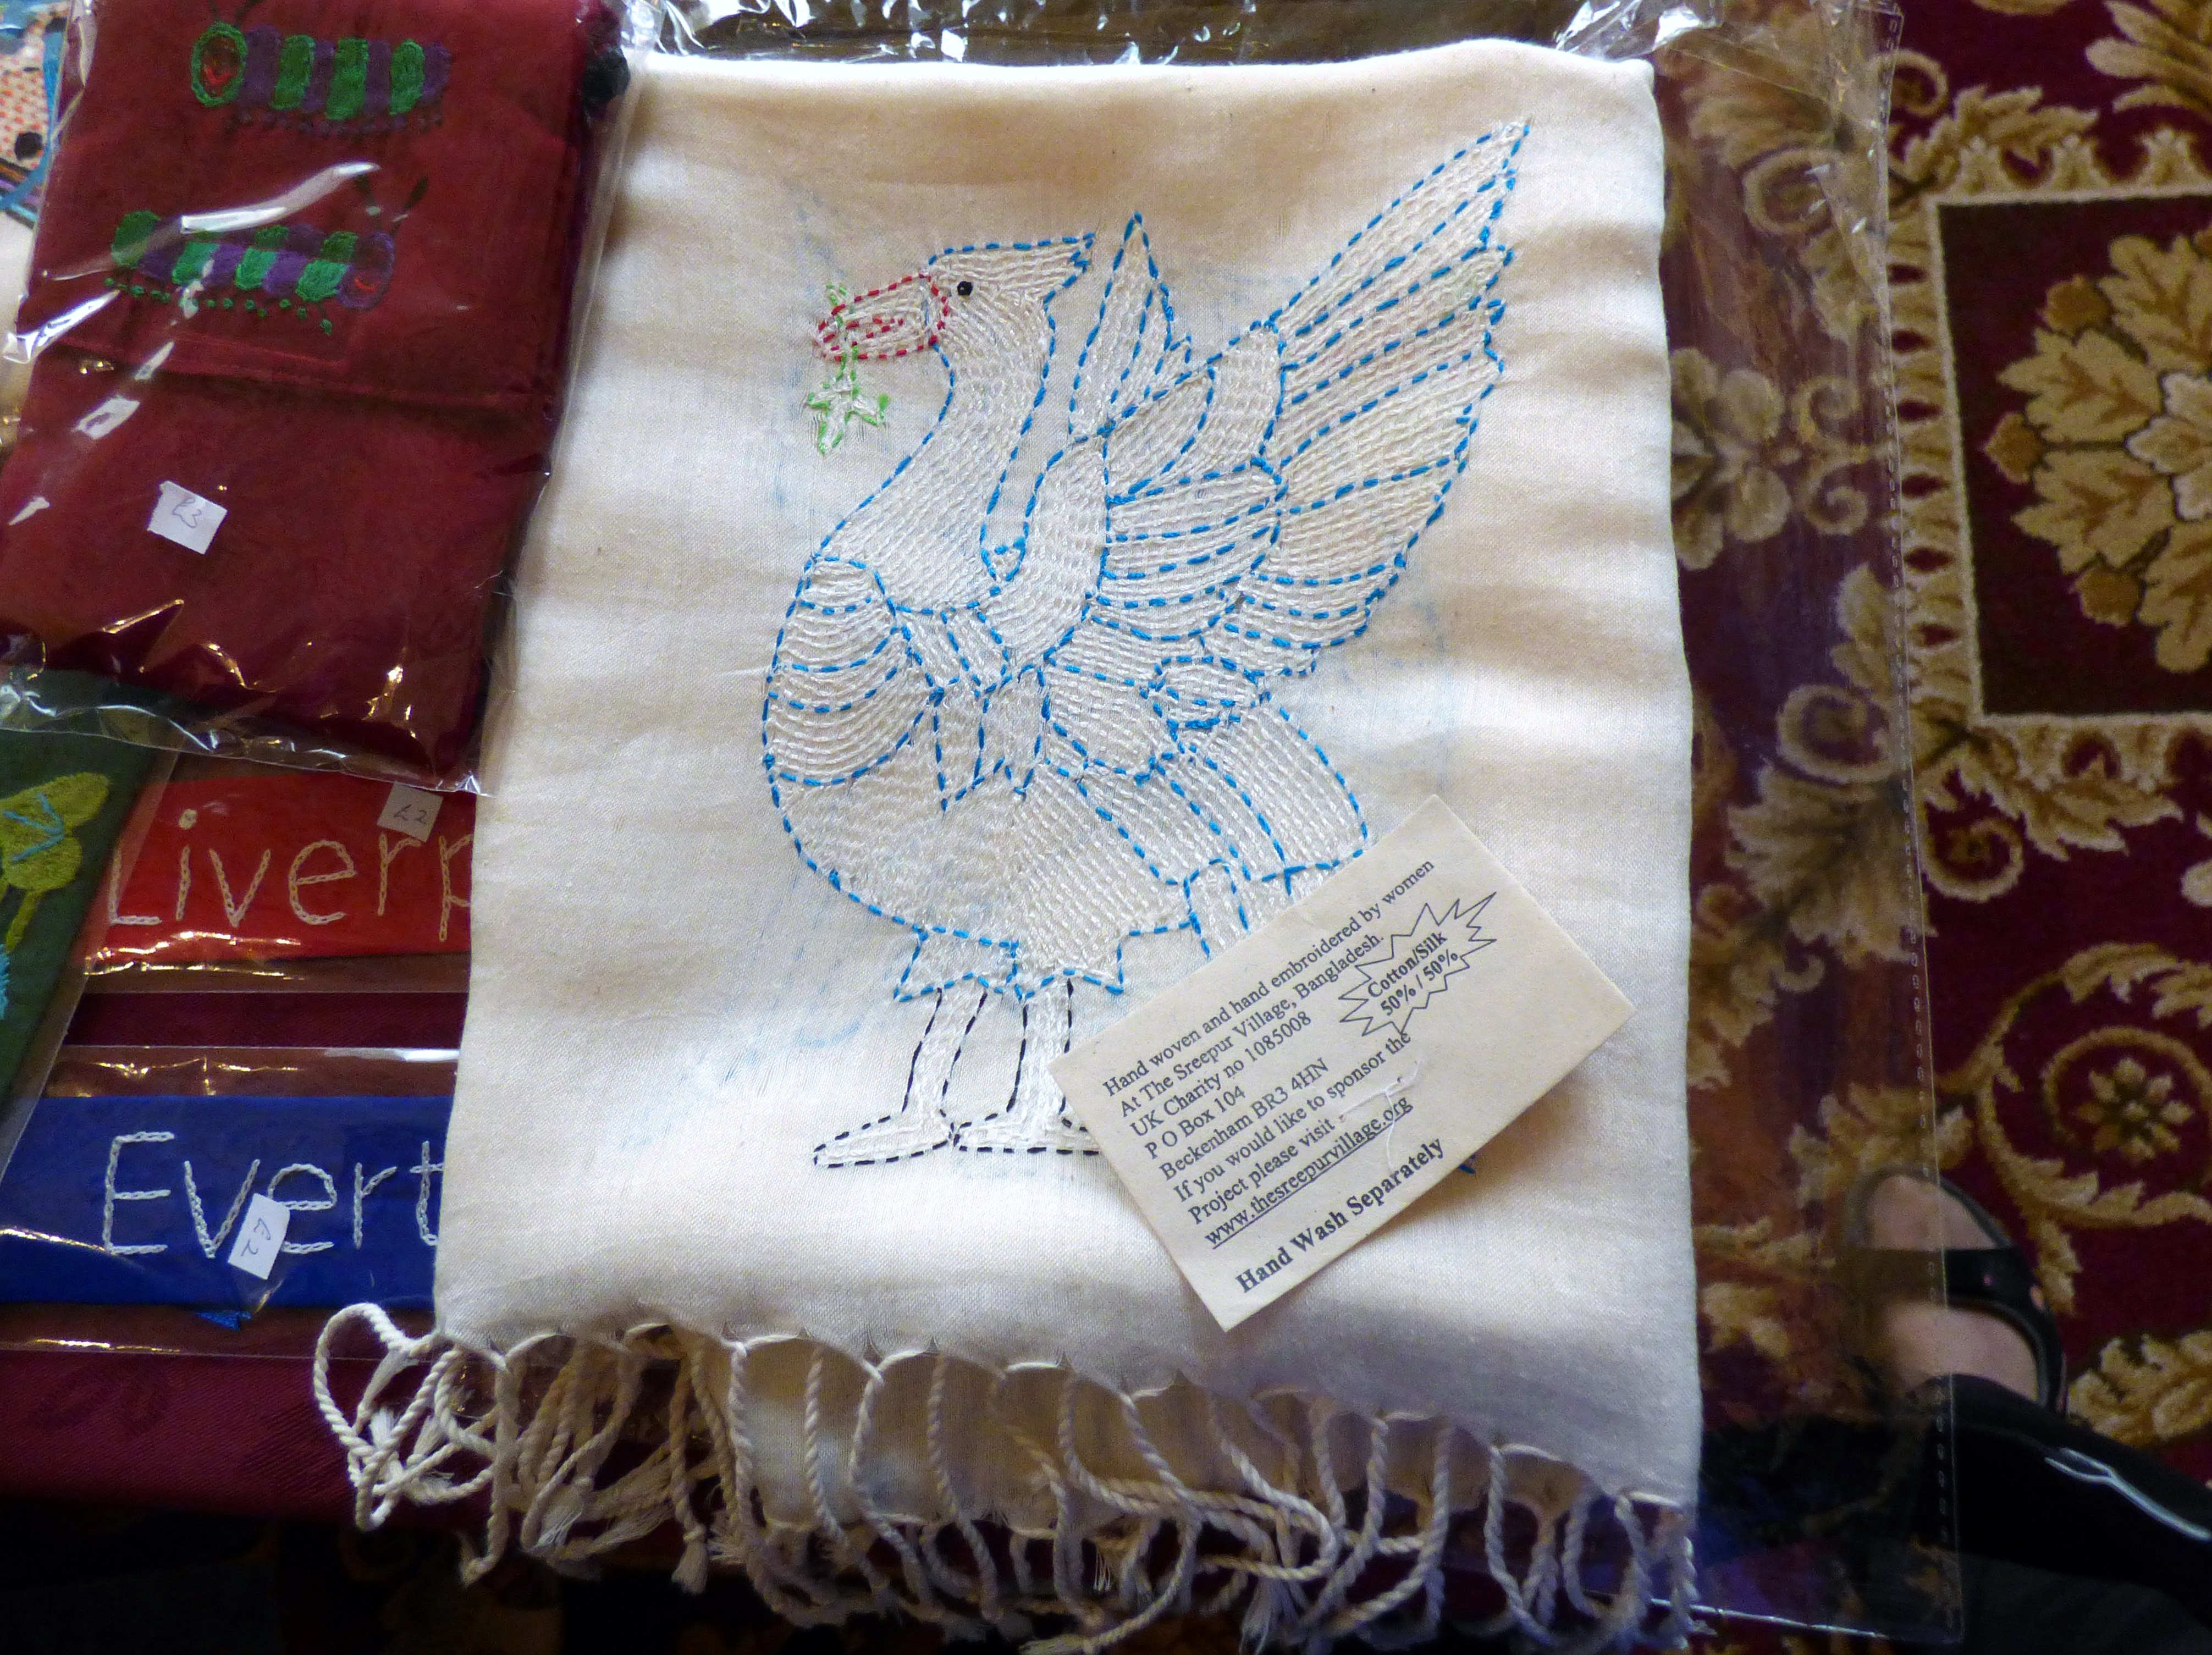 new design liver bird scarf at "Threading Dreams" exhibition at Liverpool Town Hall, August 2016